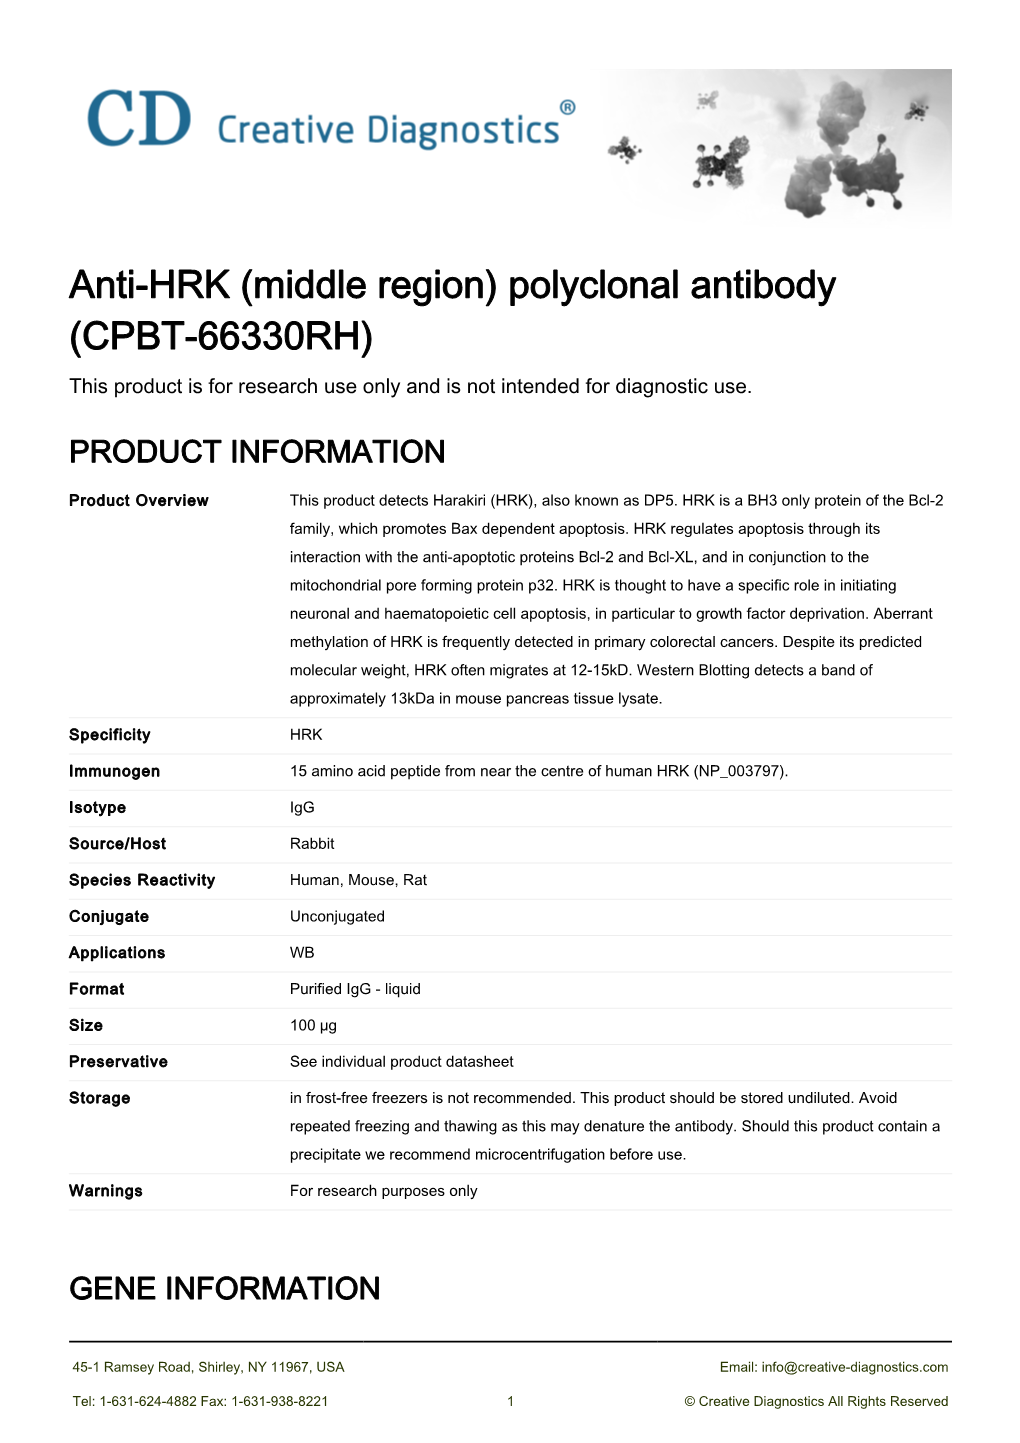 Anti-HRK (Middle Region) Polyclonal Antibody (CPBT-66330RH) This Product Is for Research Use Only and Is Not Intended for Diagnostic Use